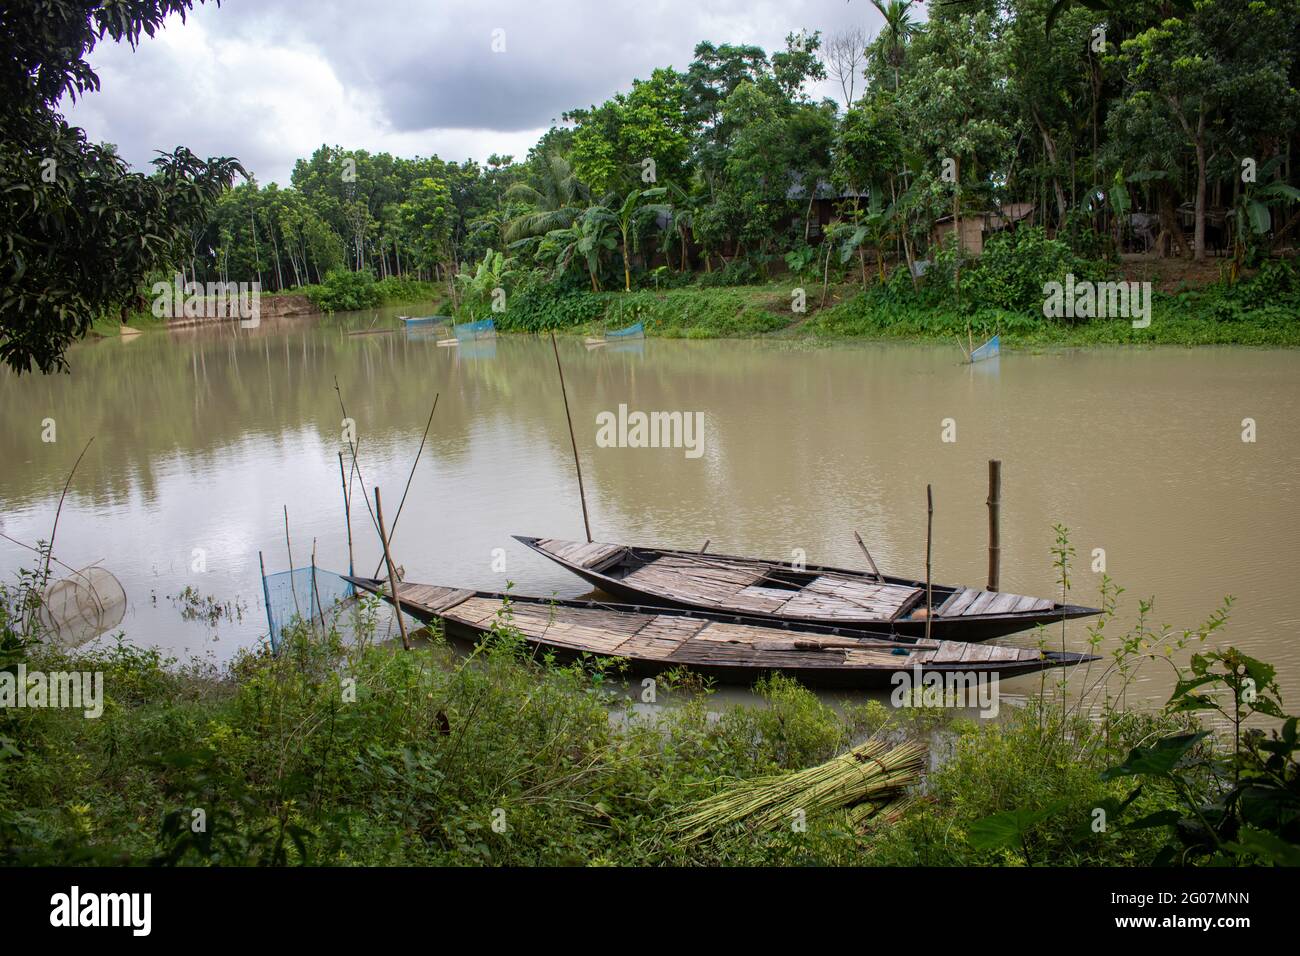 Bangladesh is a riverine country. A quiet beautiful small river. There are two boats tied up at the wharf. Stock Photo